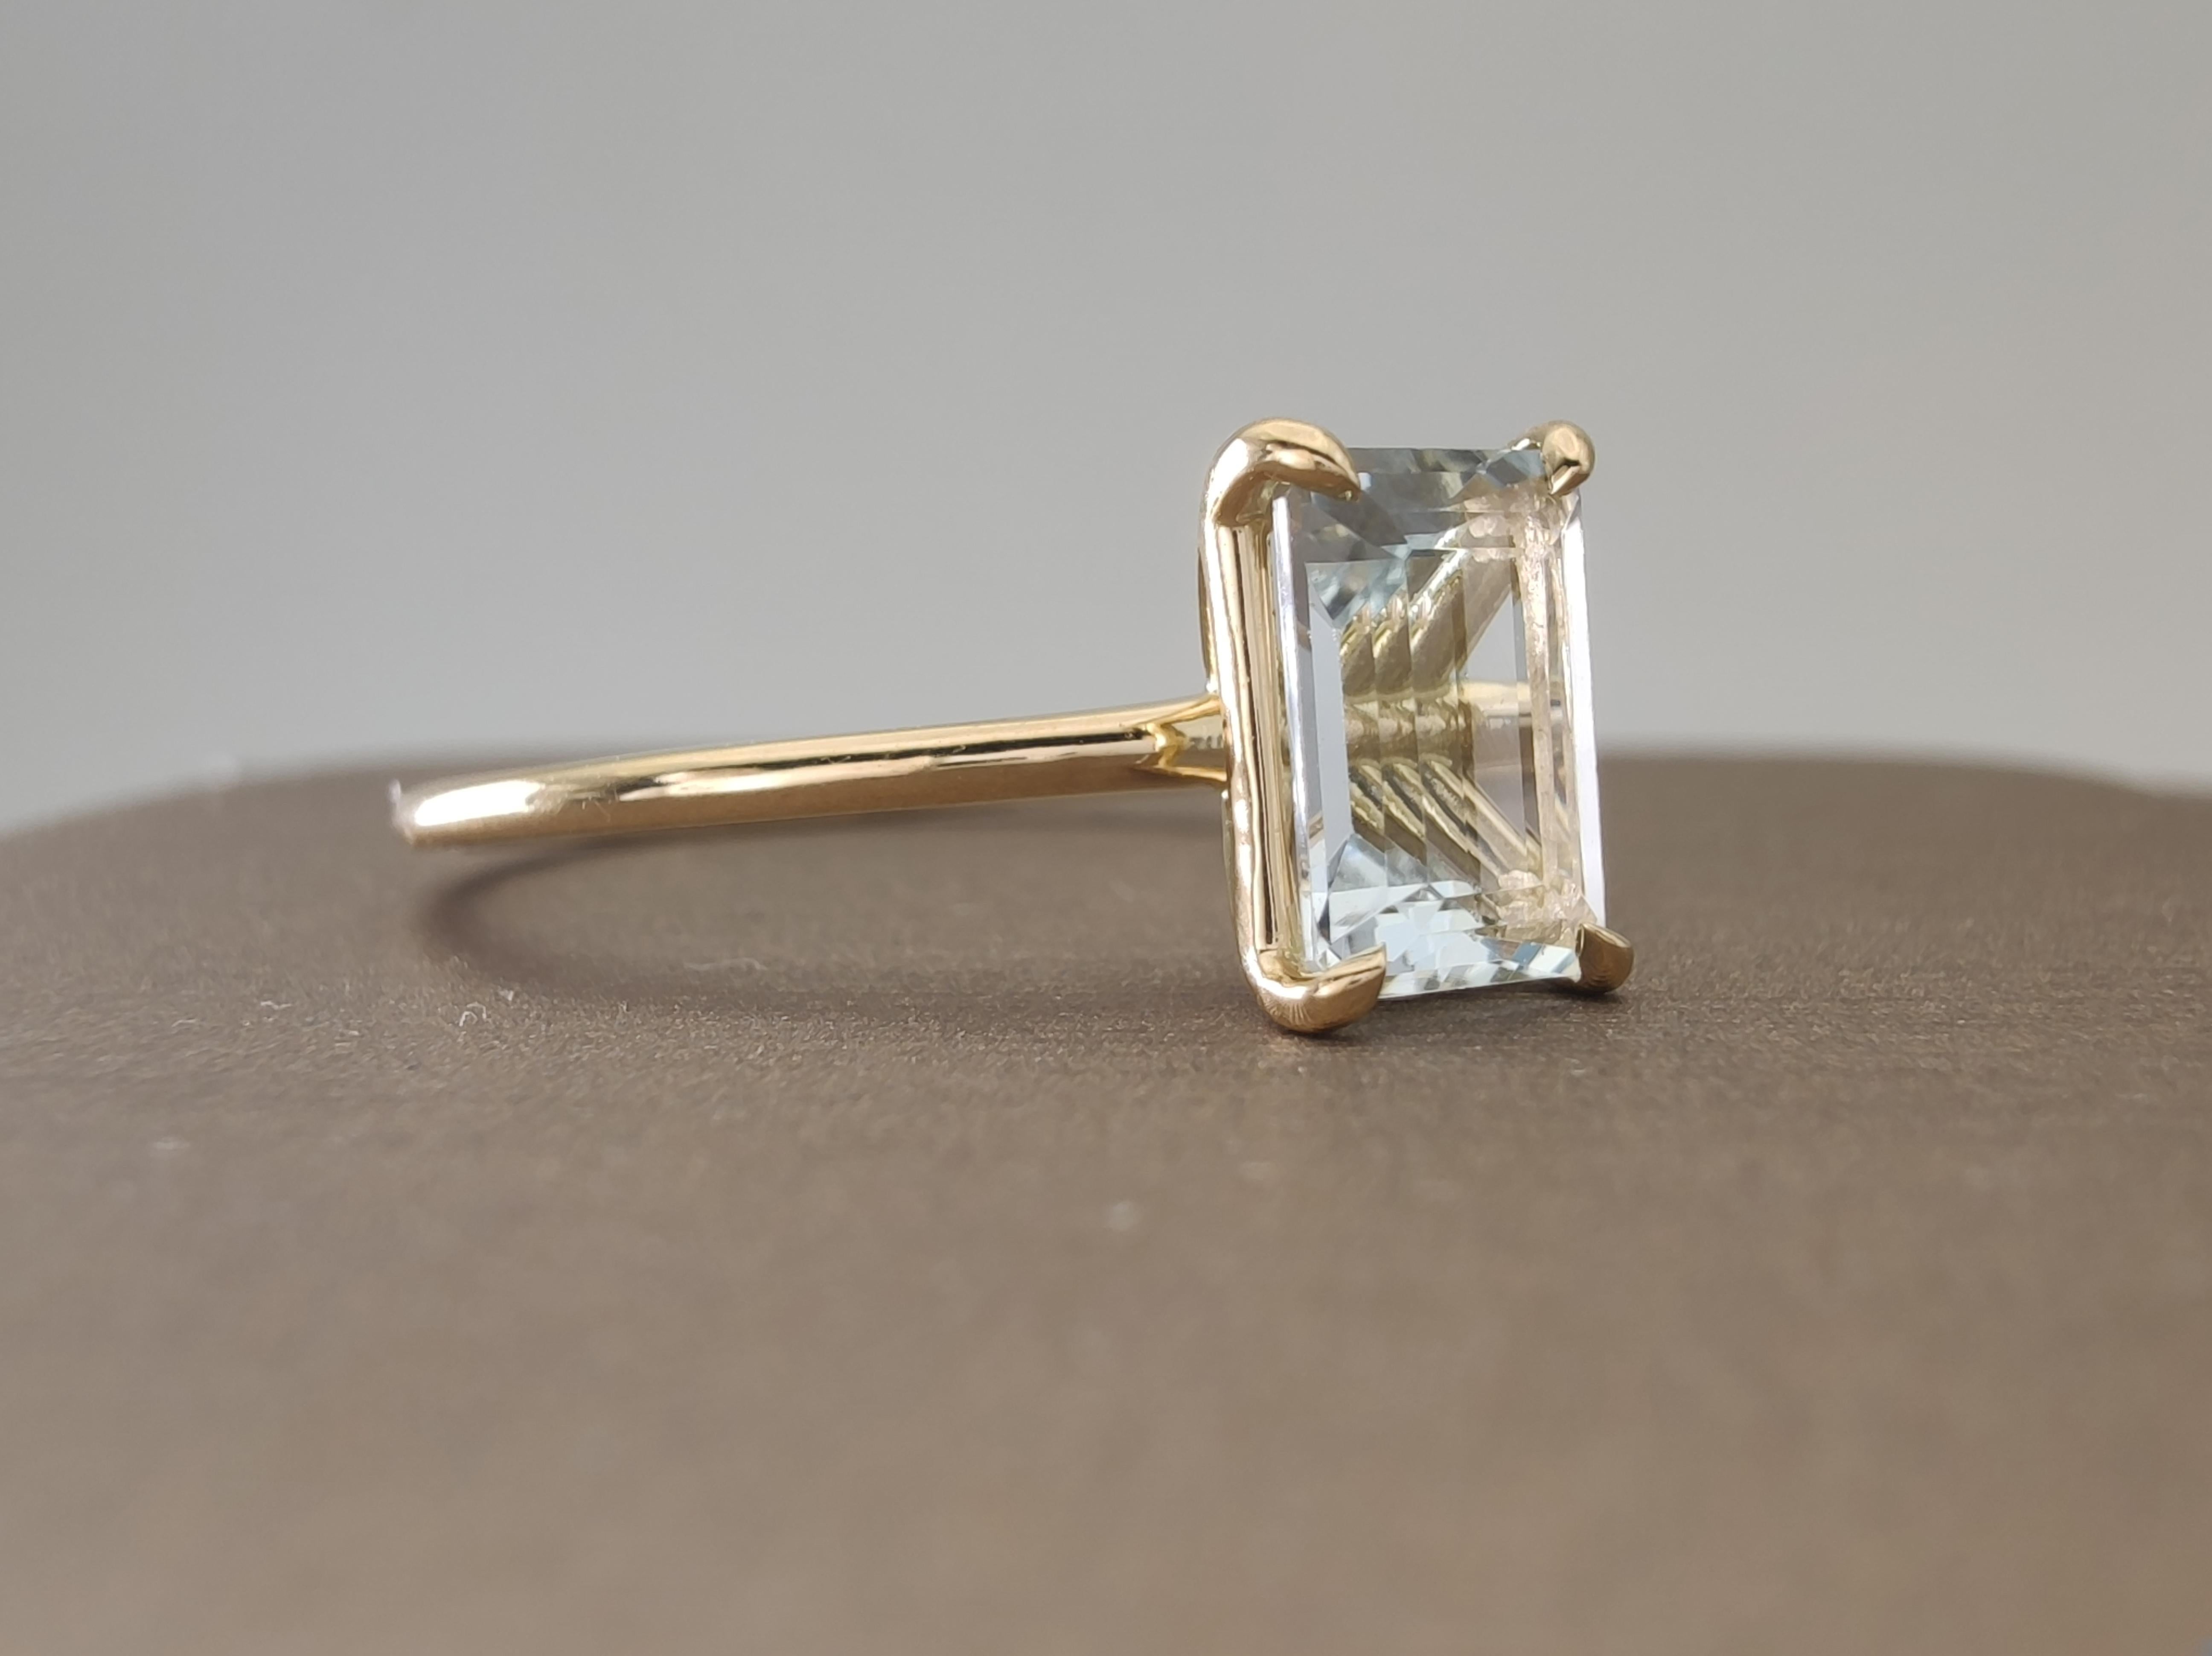 Captivating 18K Gold Solitaire Ring featuring a 0.83 Ct. Emerald-Cut Aquamarine In New Condition For Sale In Sant Josep de sa Talaia, IB